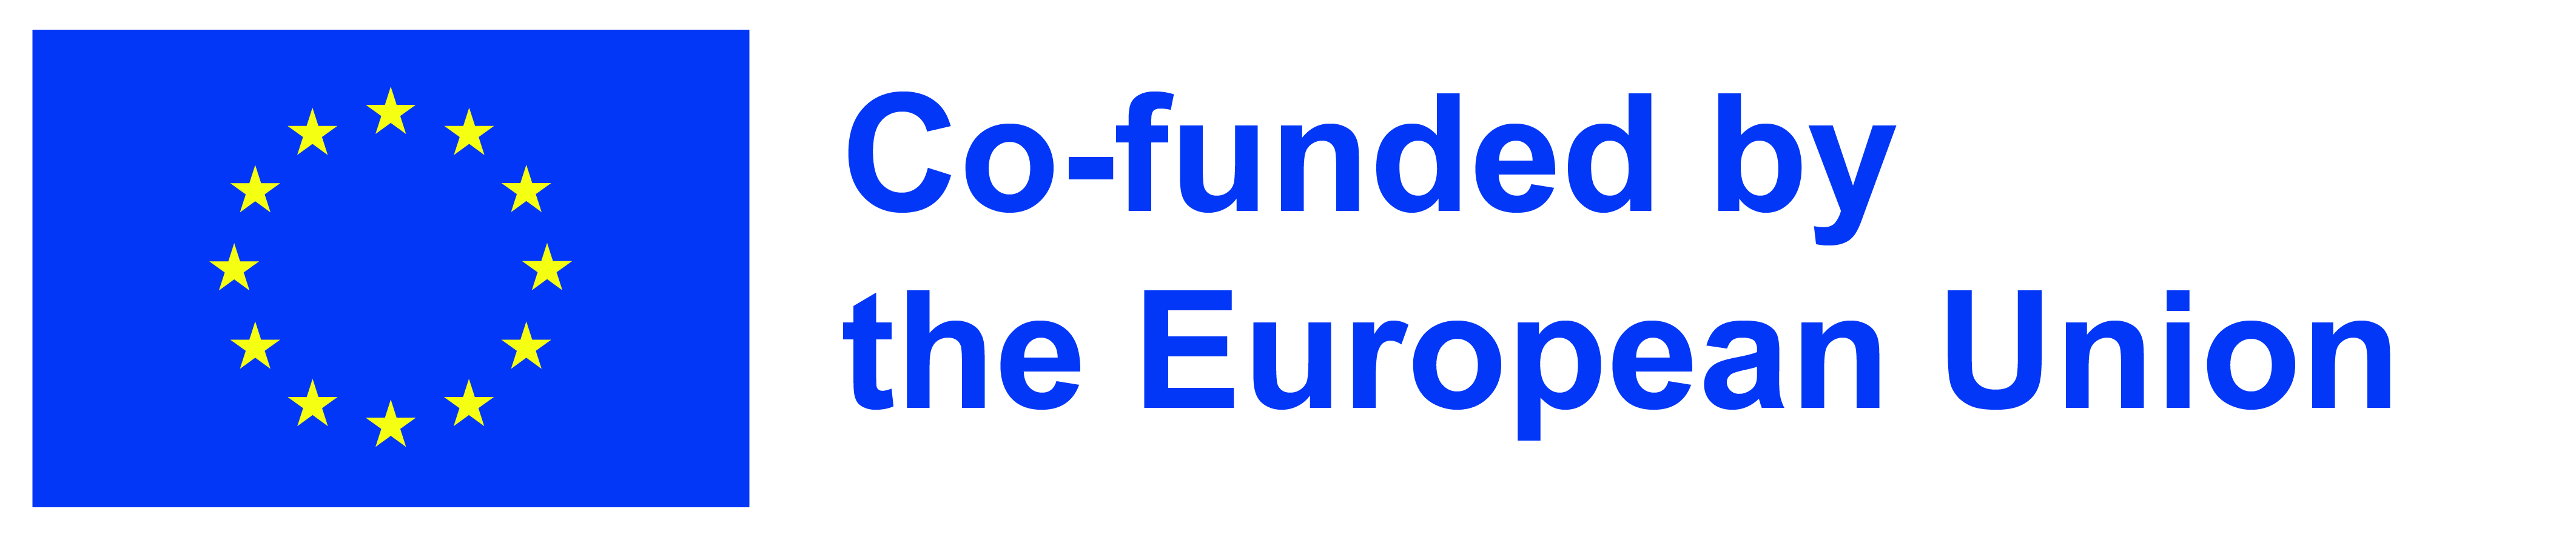 CO-funded by the EU (logo)